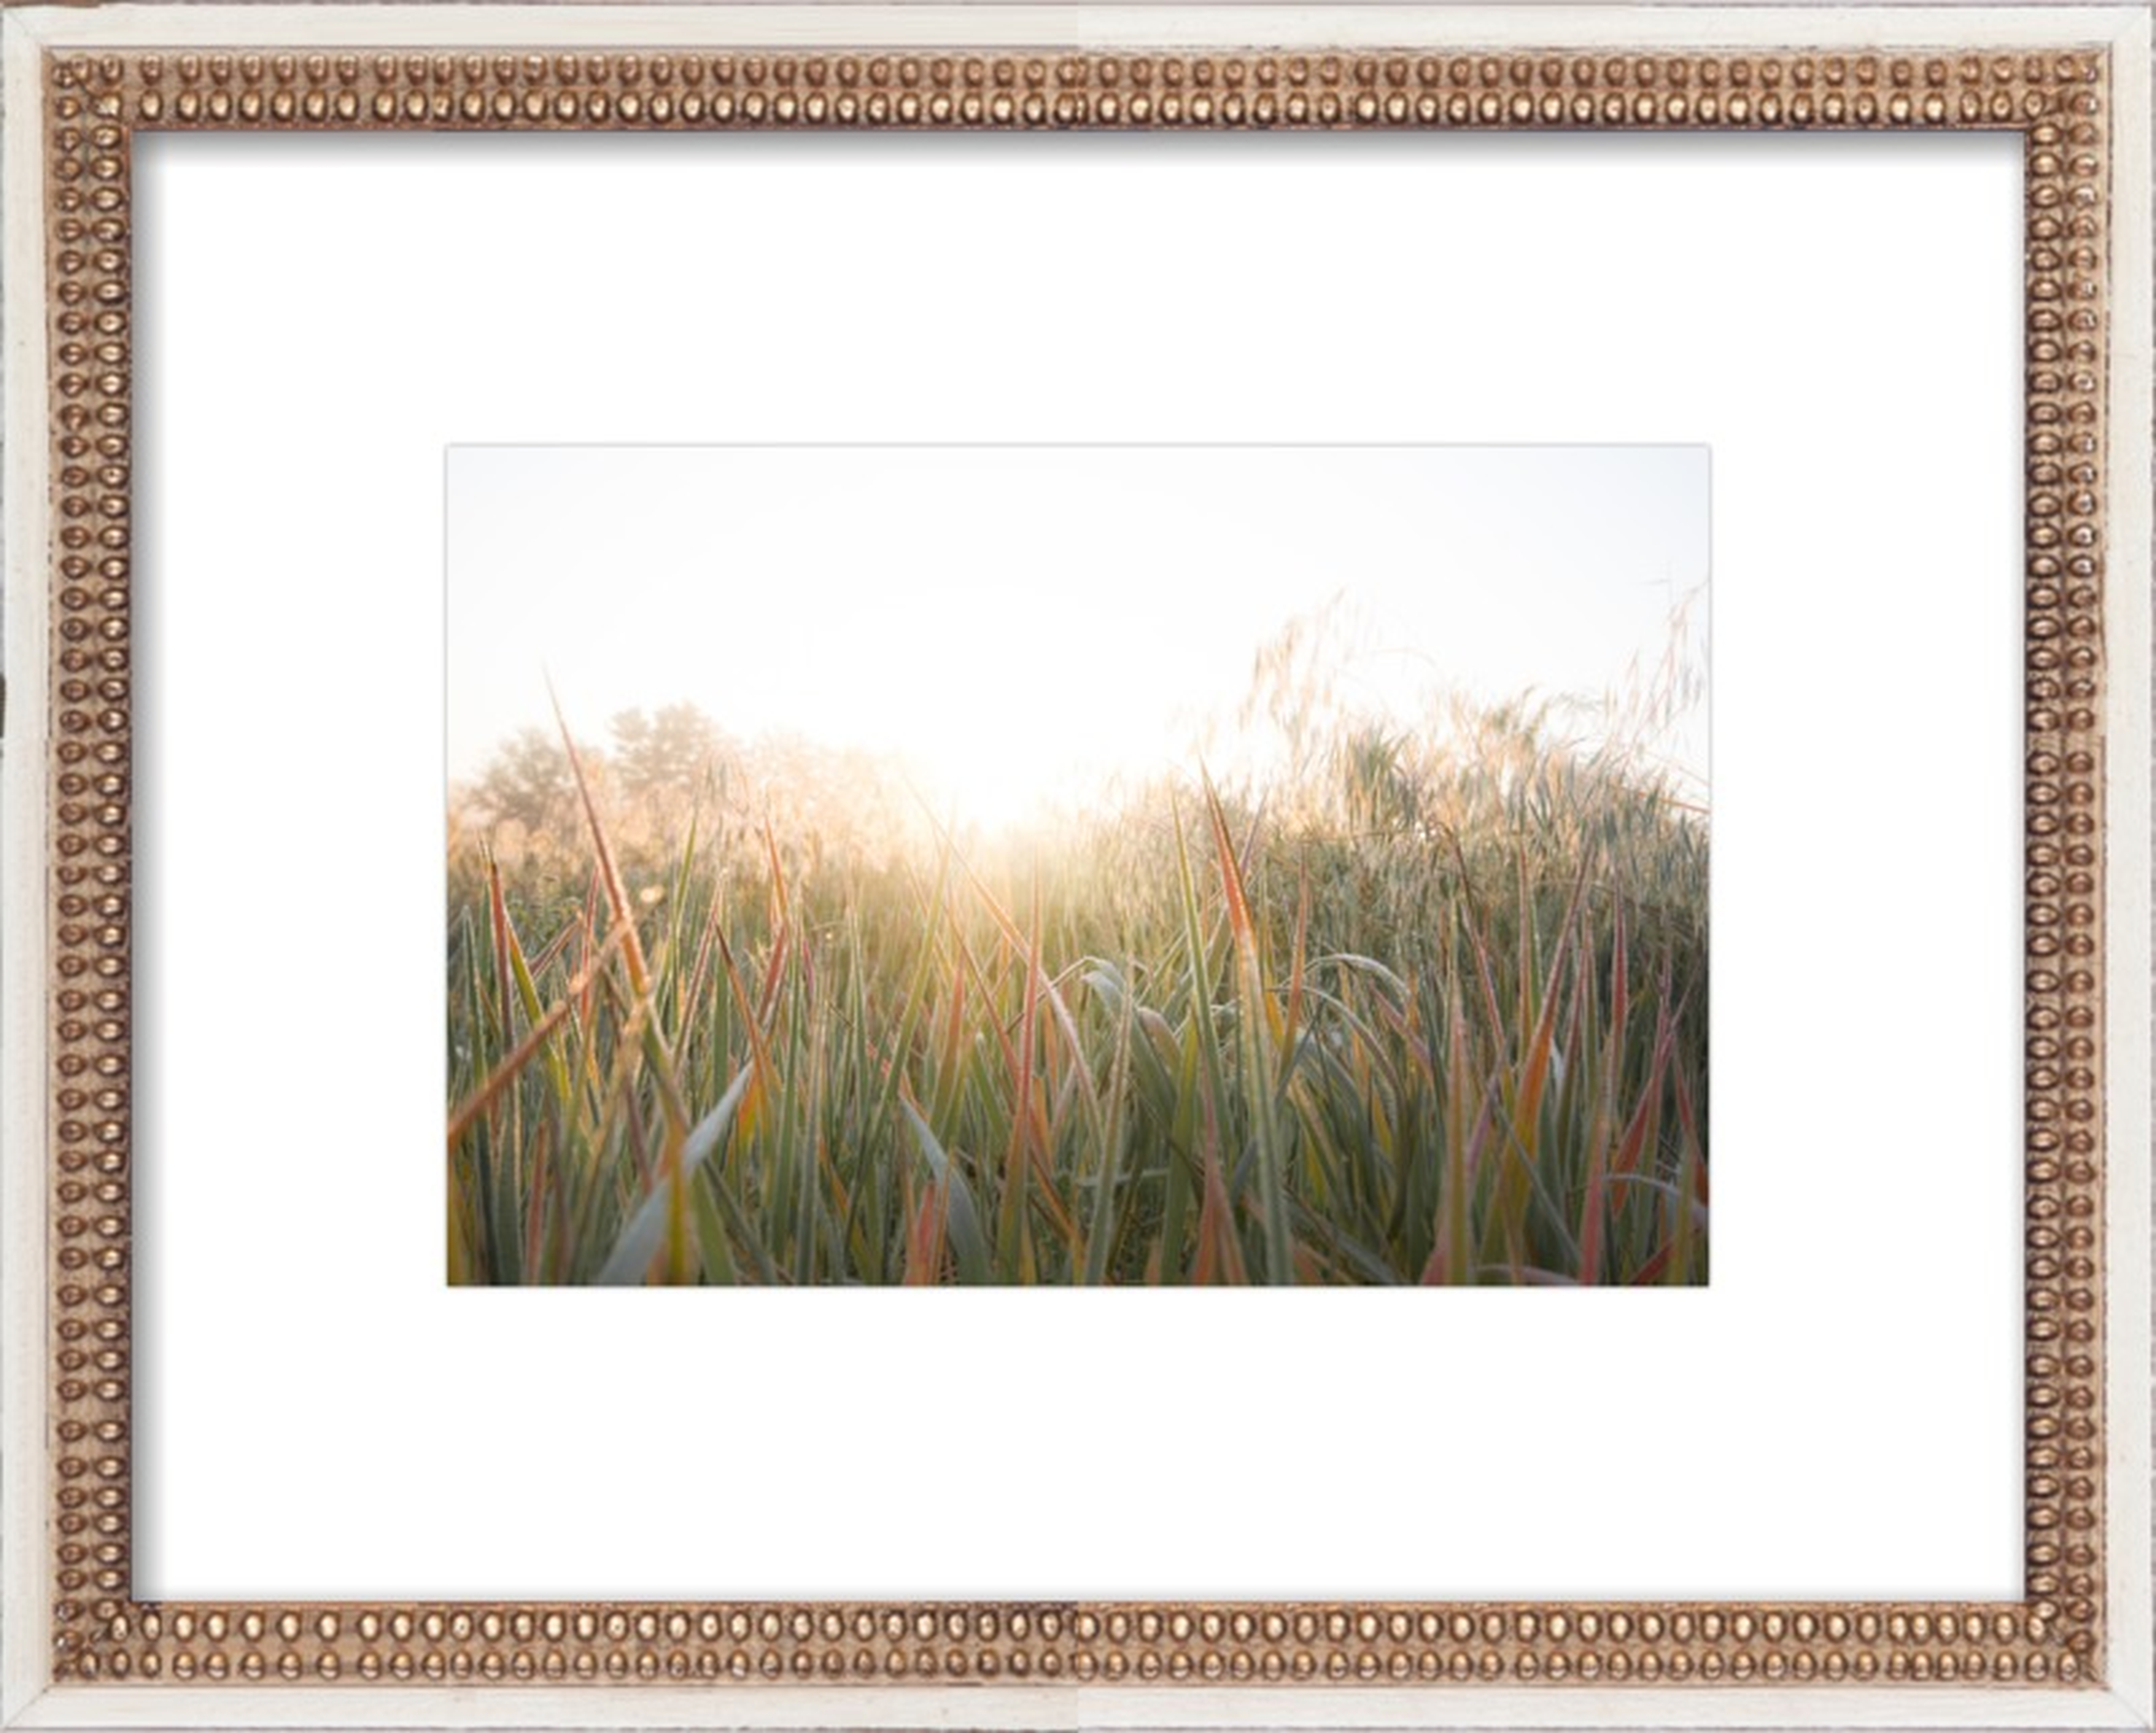 Wild Grasses by Amy Kimball for Artfully Walls, Photo Paper, Print, 20" x 16" - Artfully Walls